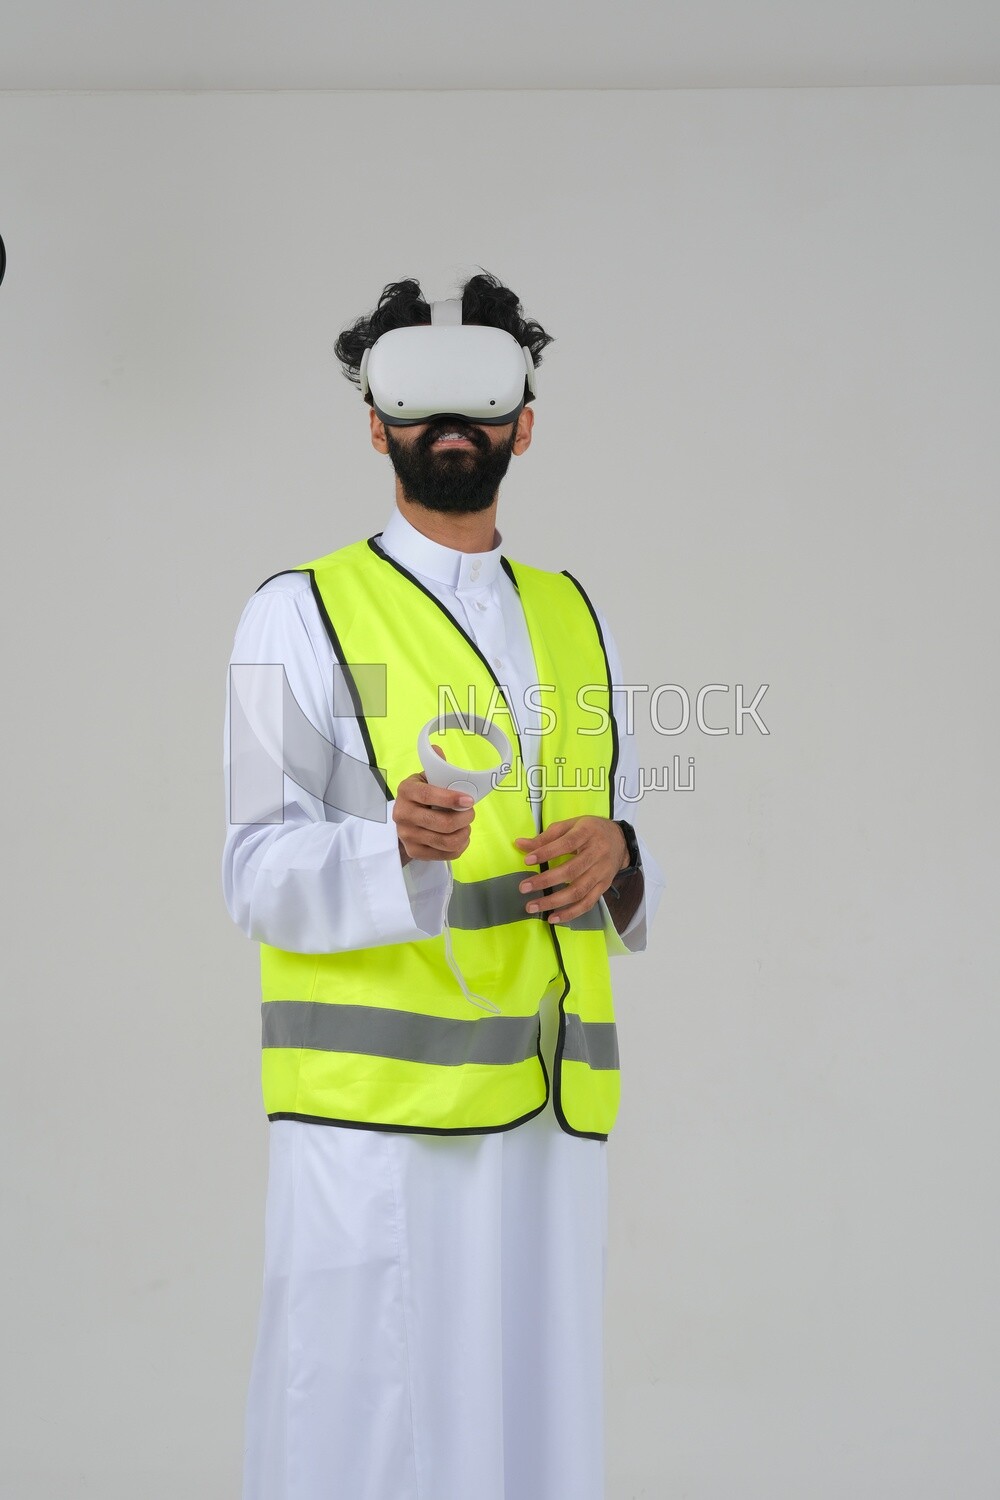 Saudi engineer wearing a safety vest, use the VR of 3D hologram technology, engineering professions and jobs, white background, Saudi model